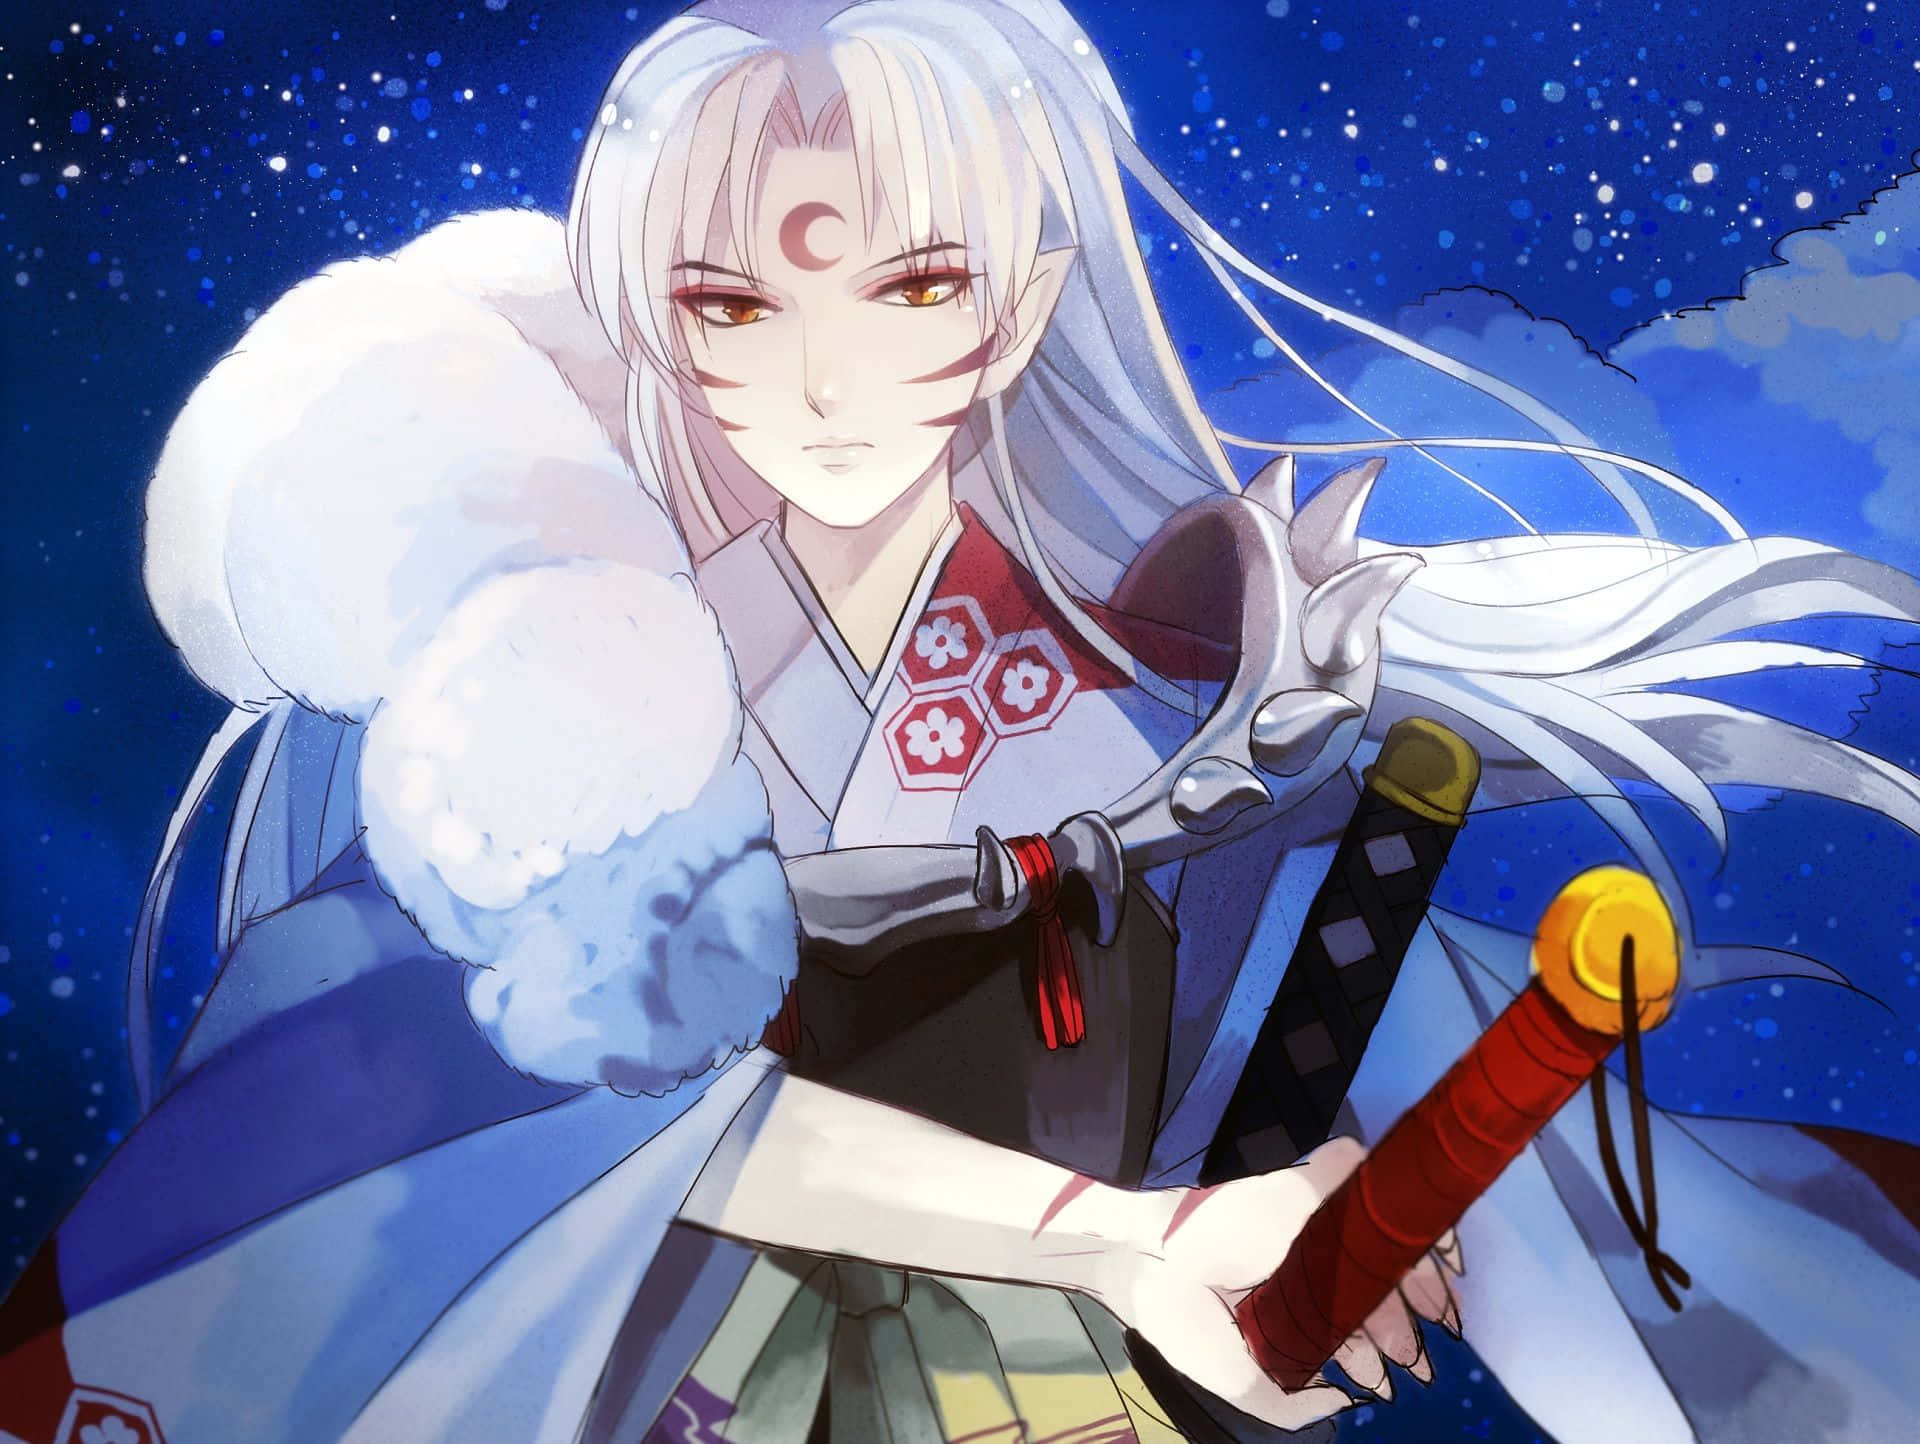 Inuyasha and Sesshomaru - Brothers at odds in a striking portrait Wallpaper